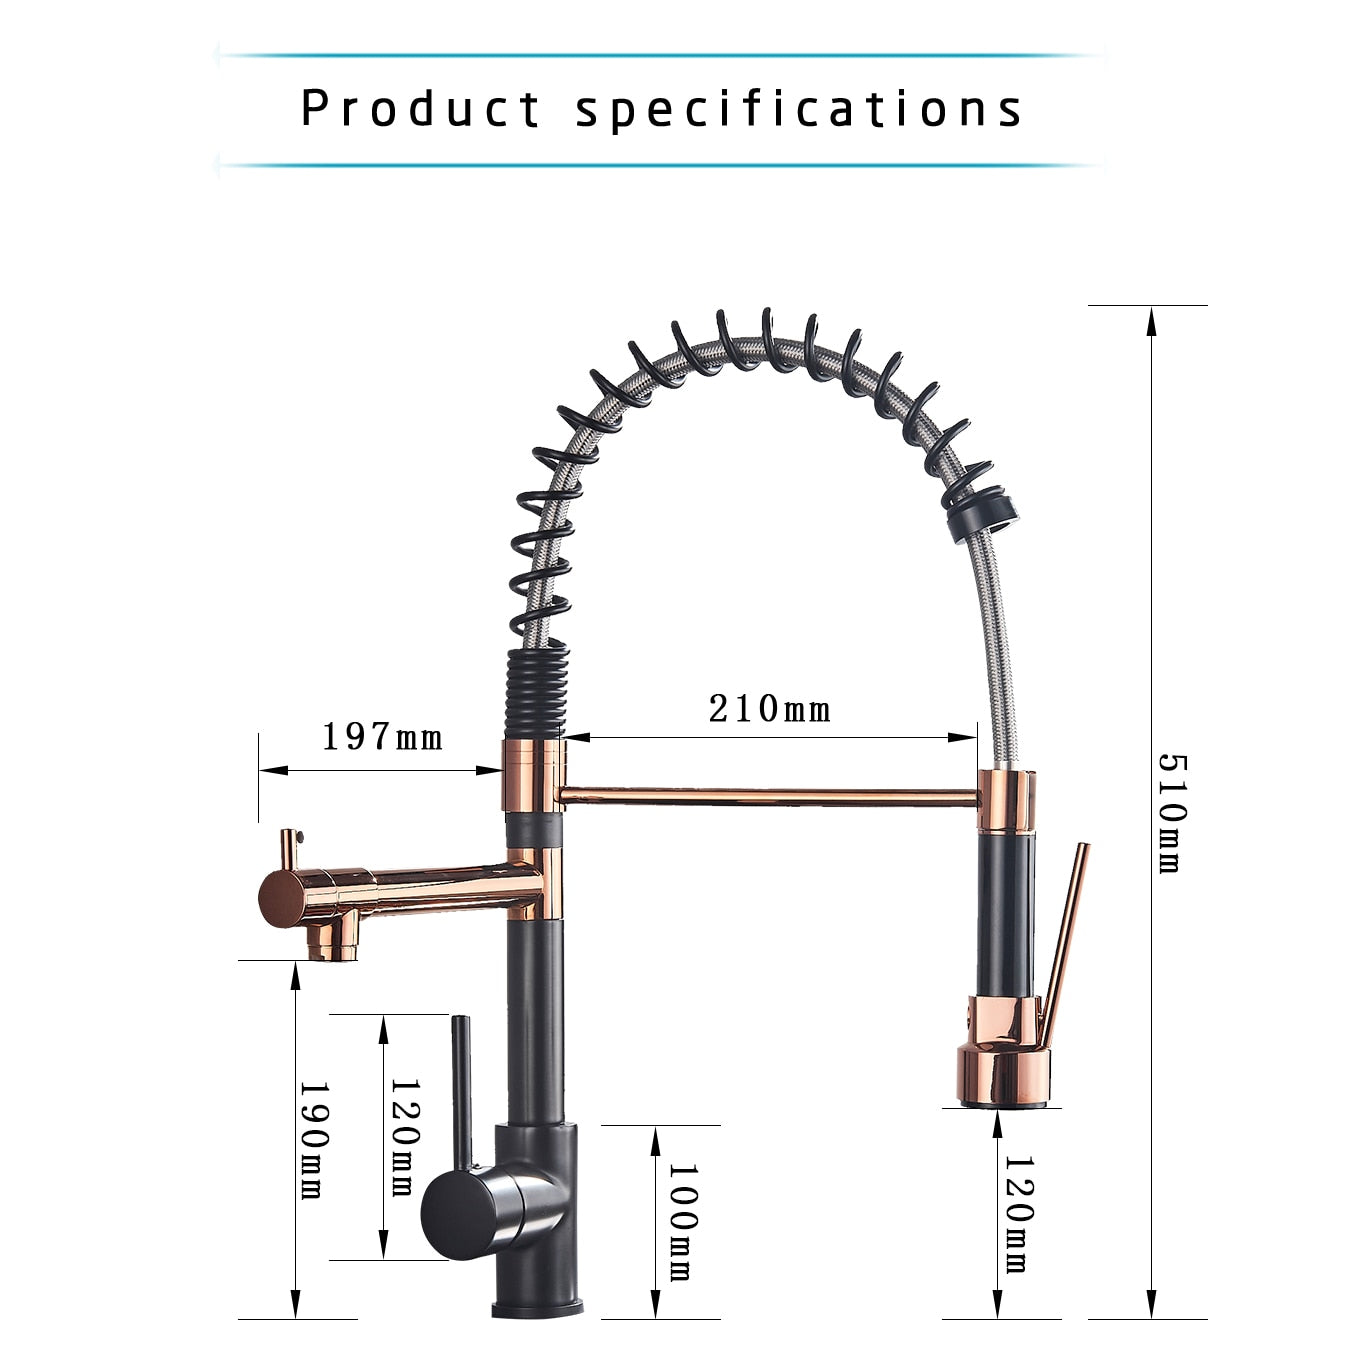 Rozin Black and Rose Golden Spring Pull Down Kitchen Sink Faucet  Hot &amp; Cold Water Mixer Crane Tap with Dual Spout Deck Mounted